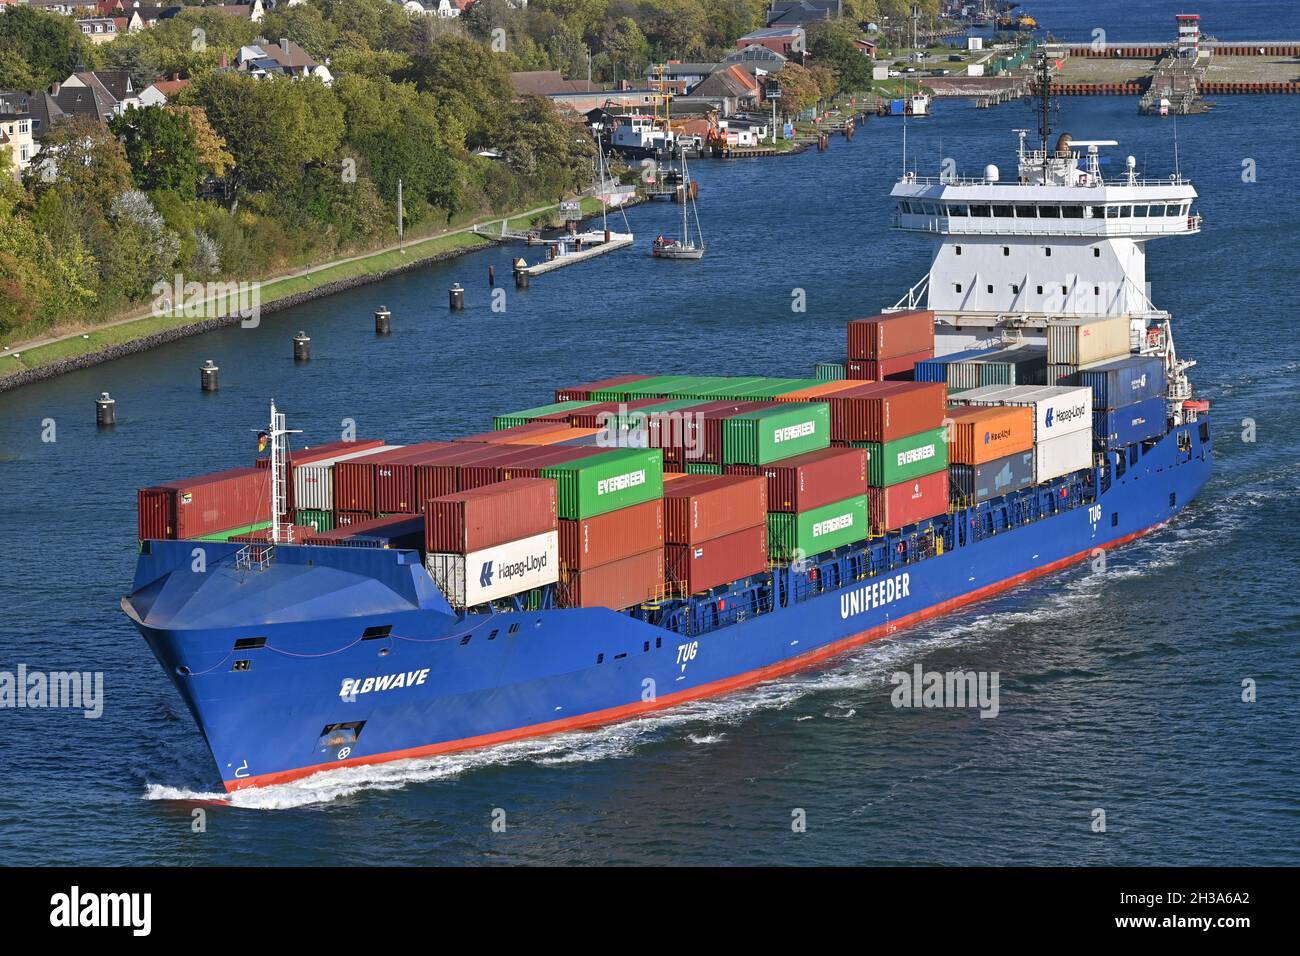 Containership ELBWAVE passing the Kiel Canal Stock Photo